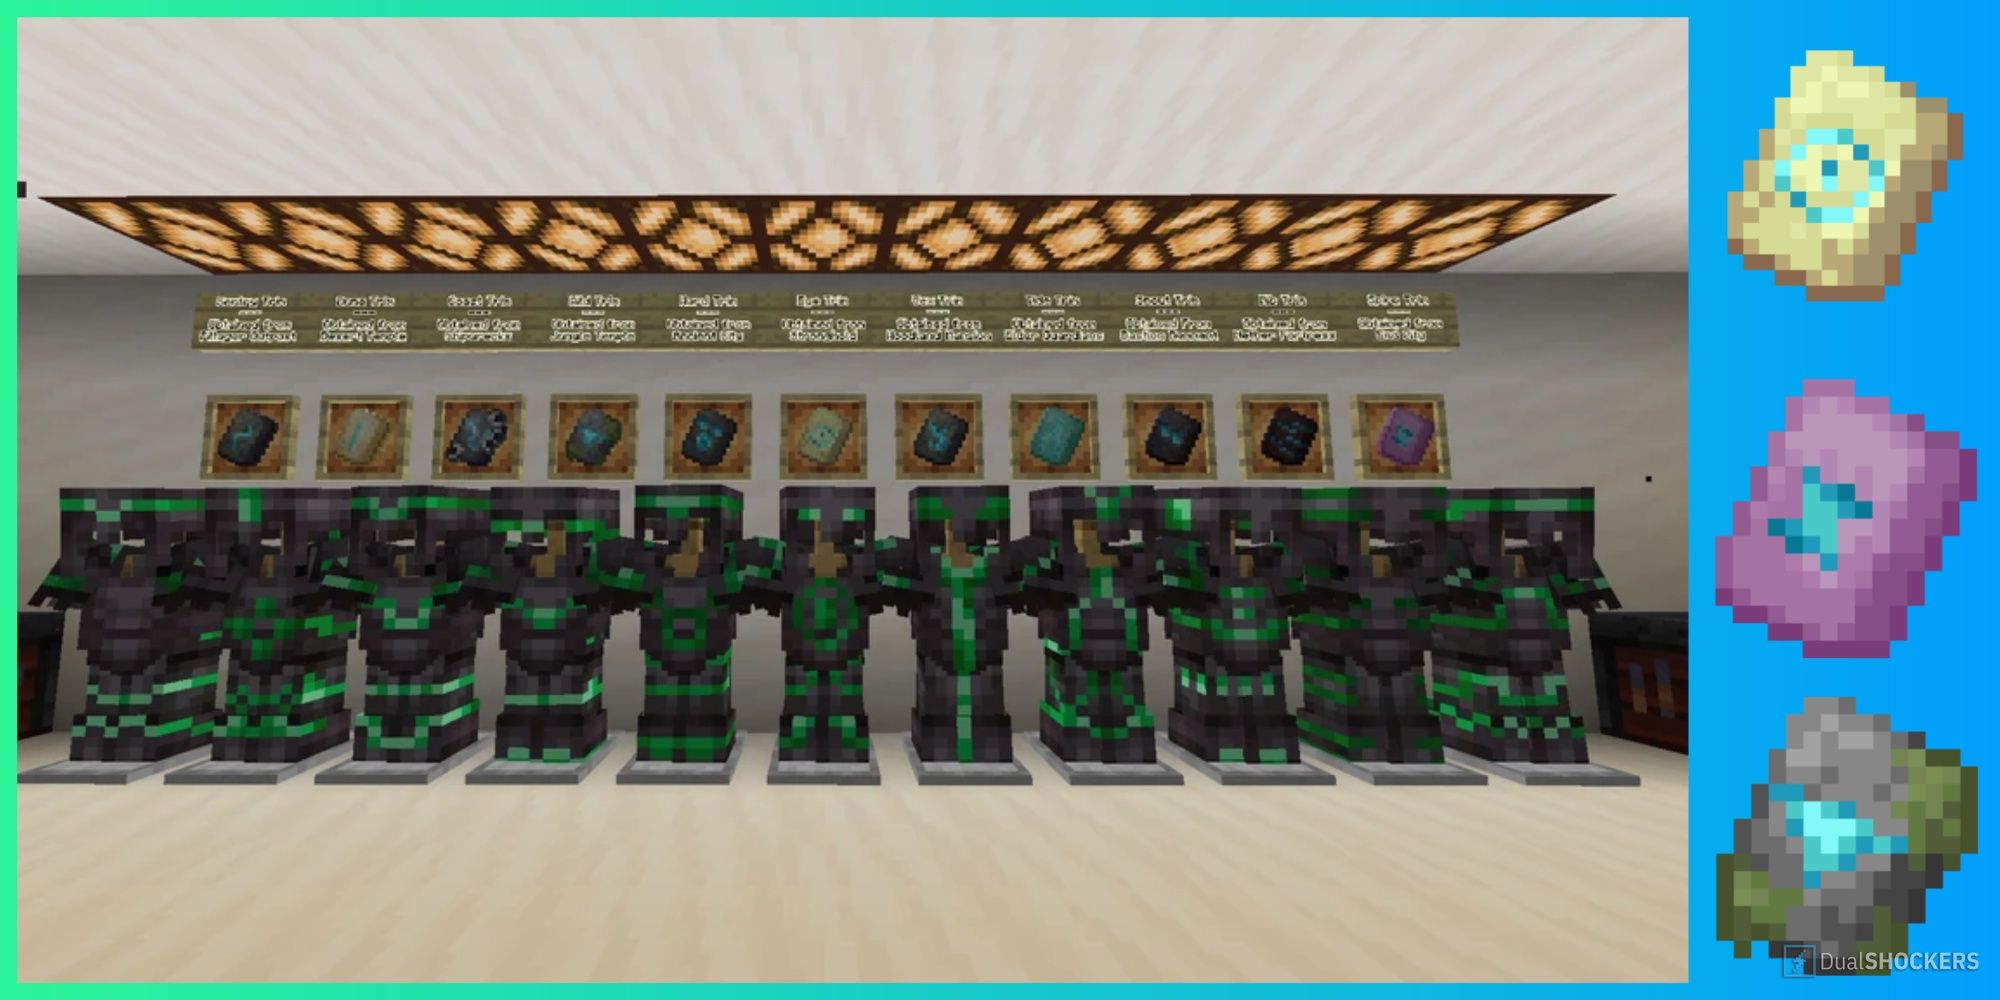 All armor trims in emerald on black alongside the eye, spire, and wild templates